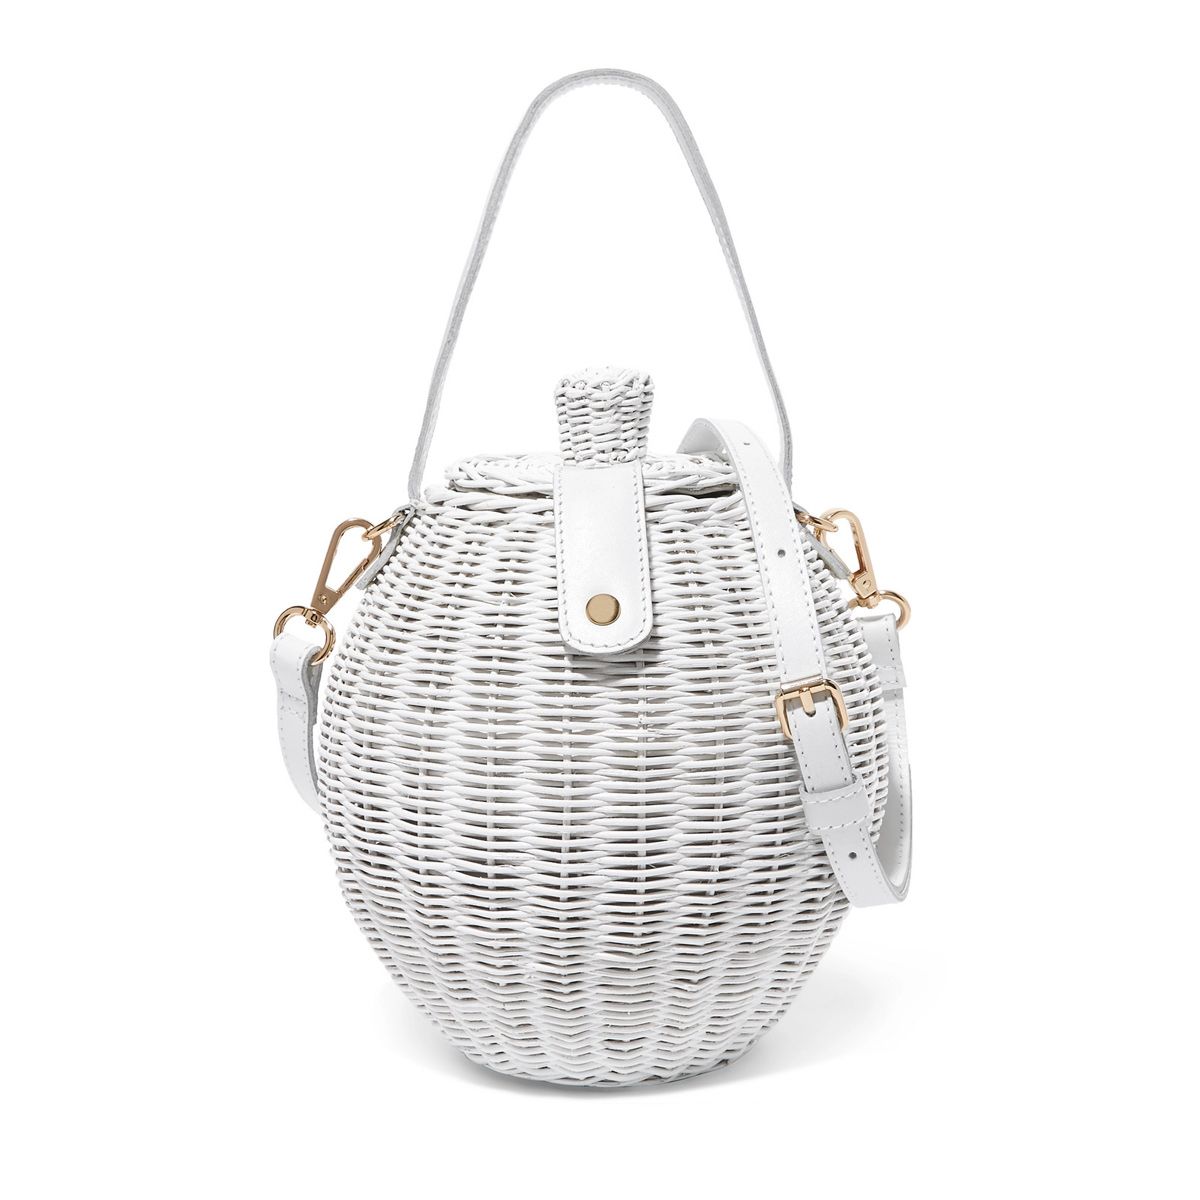 Tautou mini leather-trimmed wicker shoulder bag